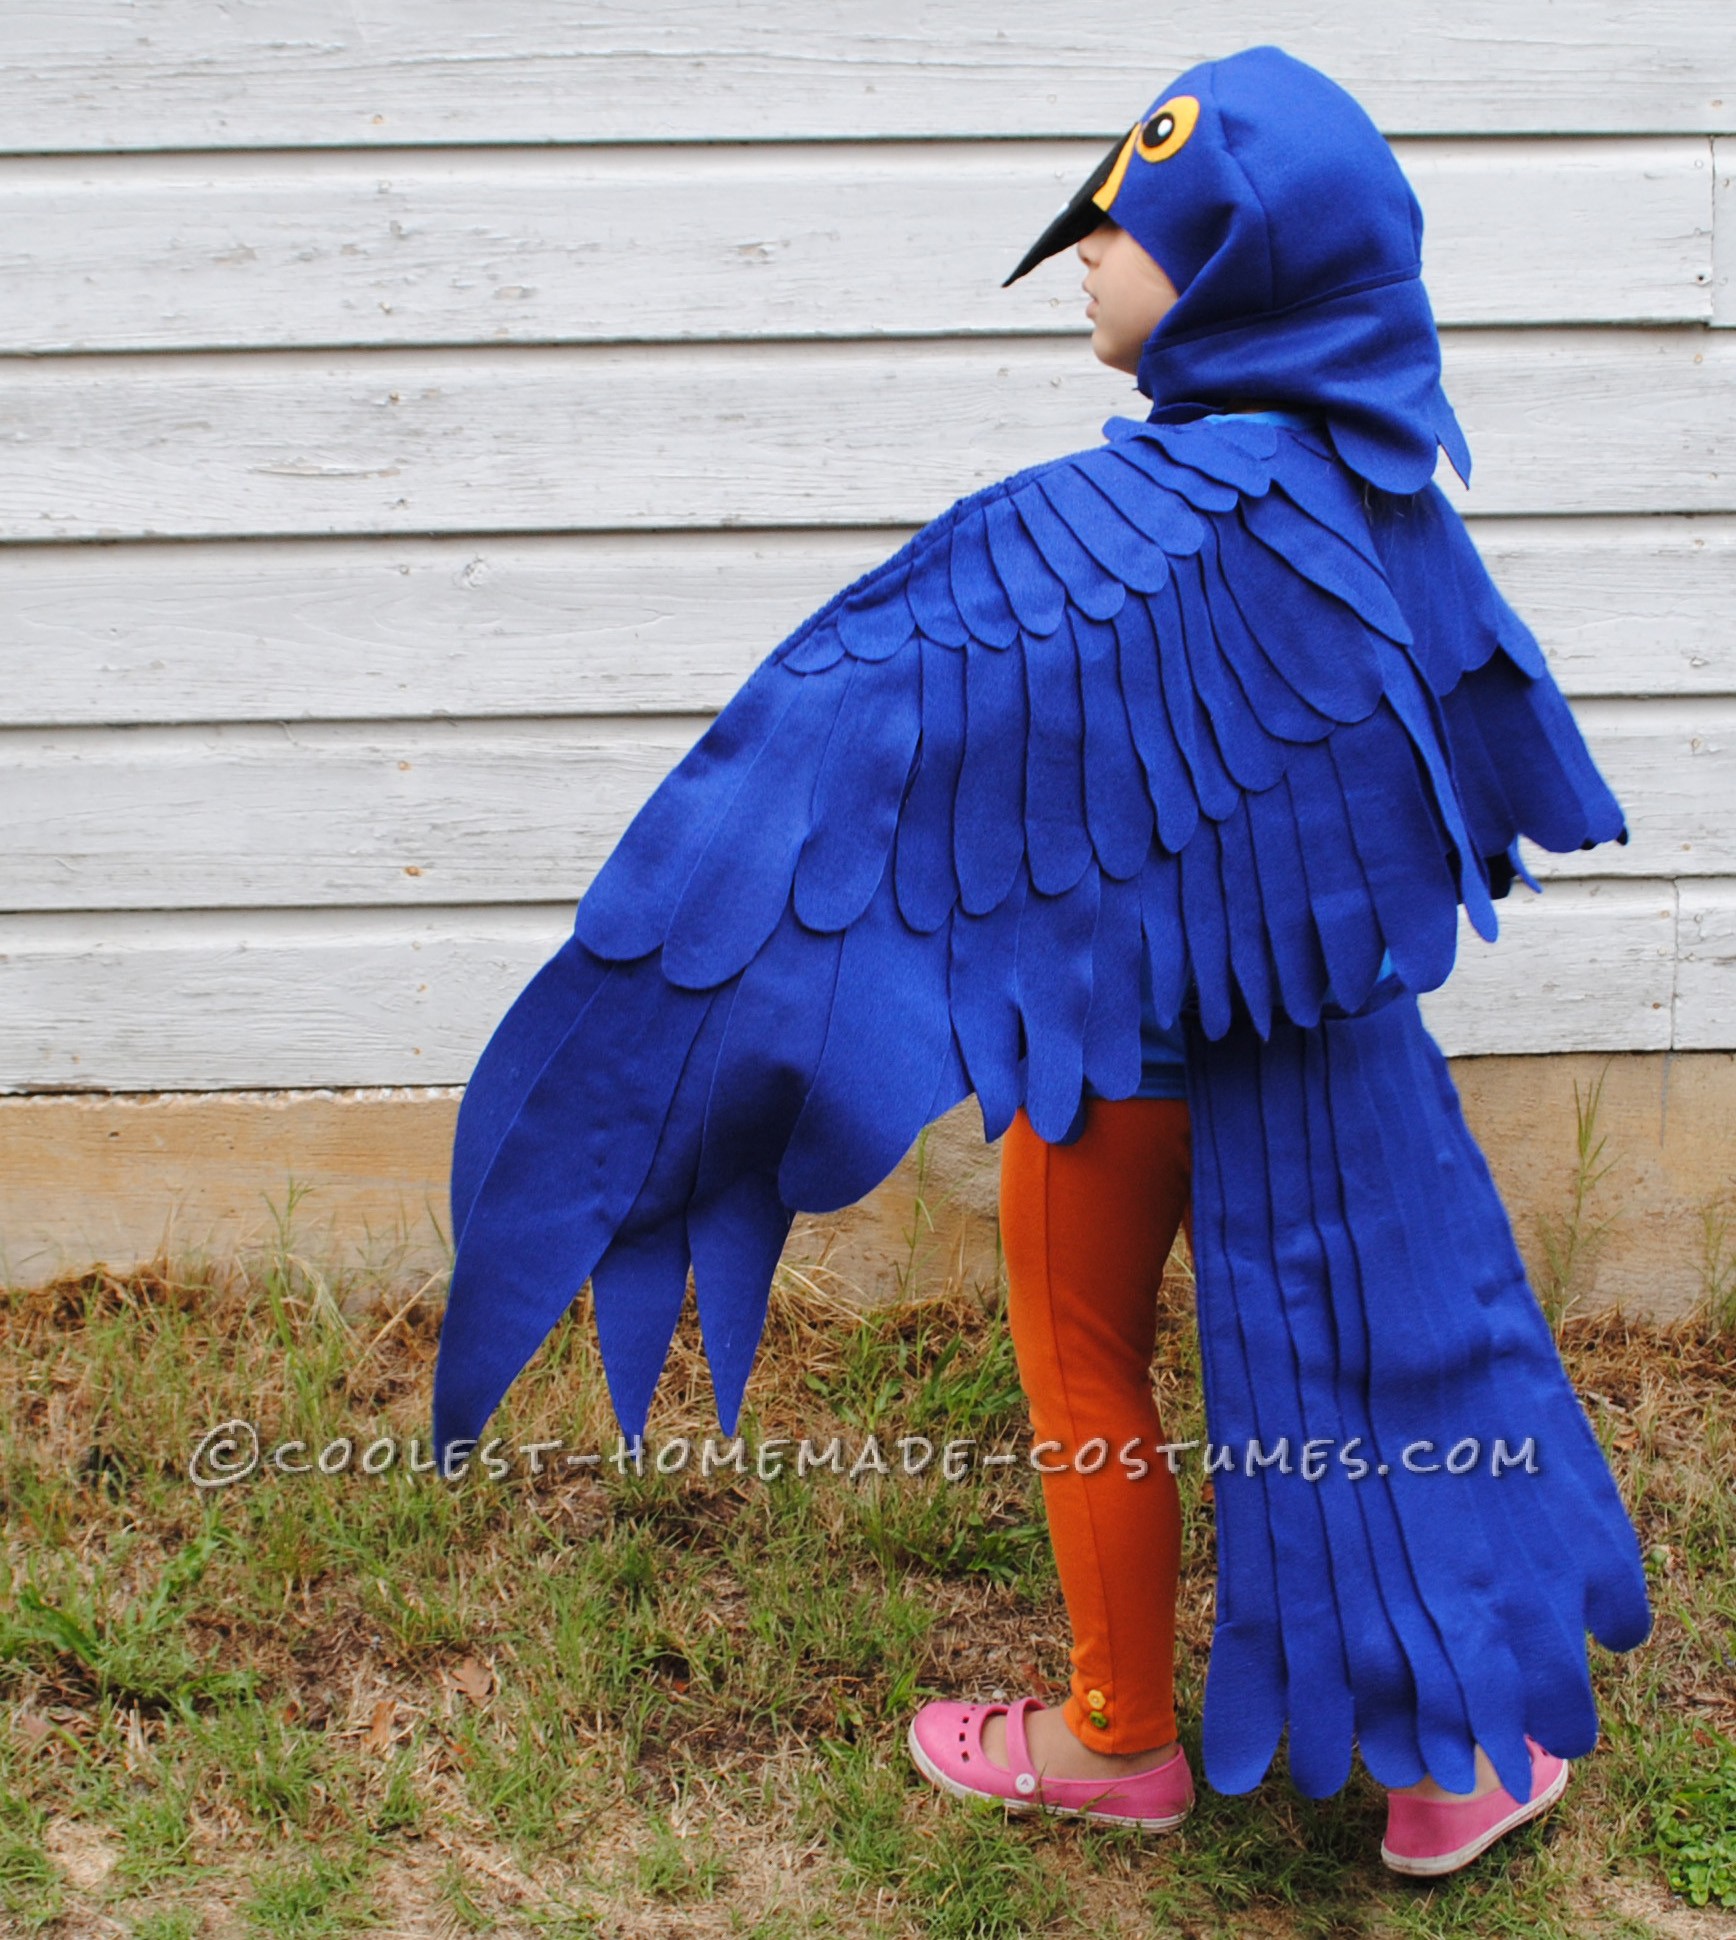 This is a blue Macaw Parrot Costume, Handmade by (Me) a stay at home mom and freelance artist
This costume is based around a blue tshirt layere